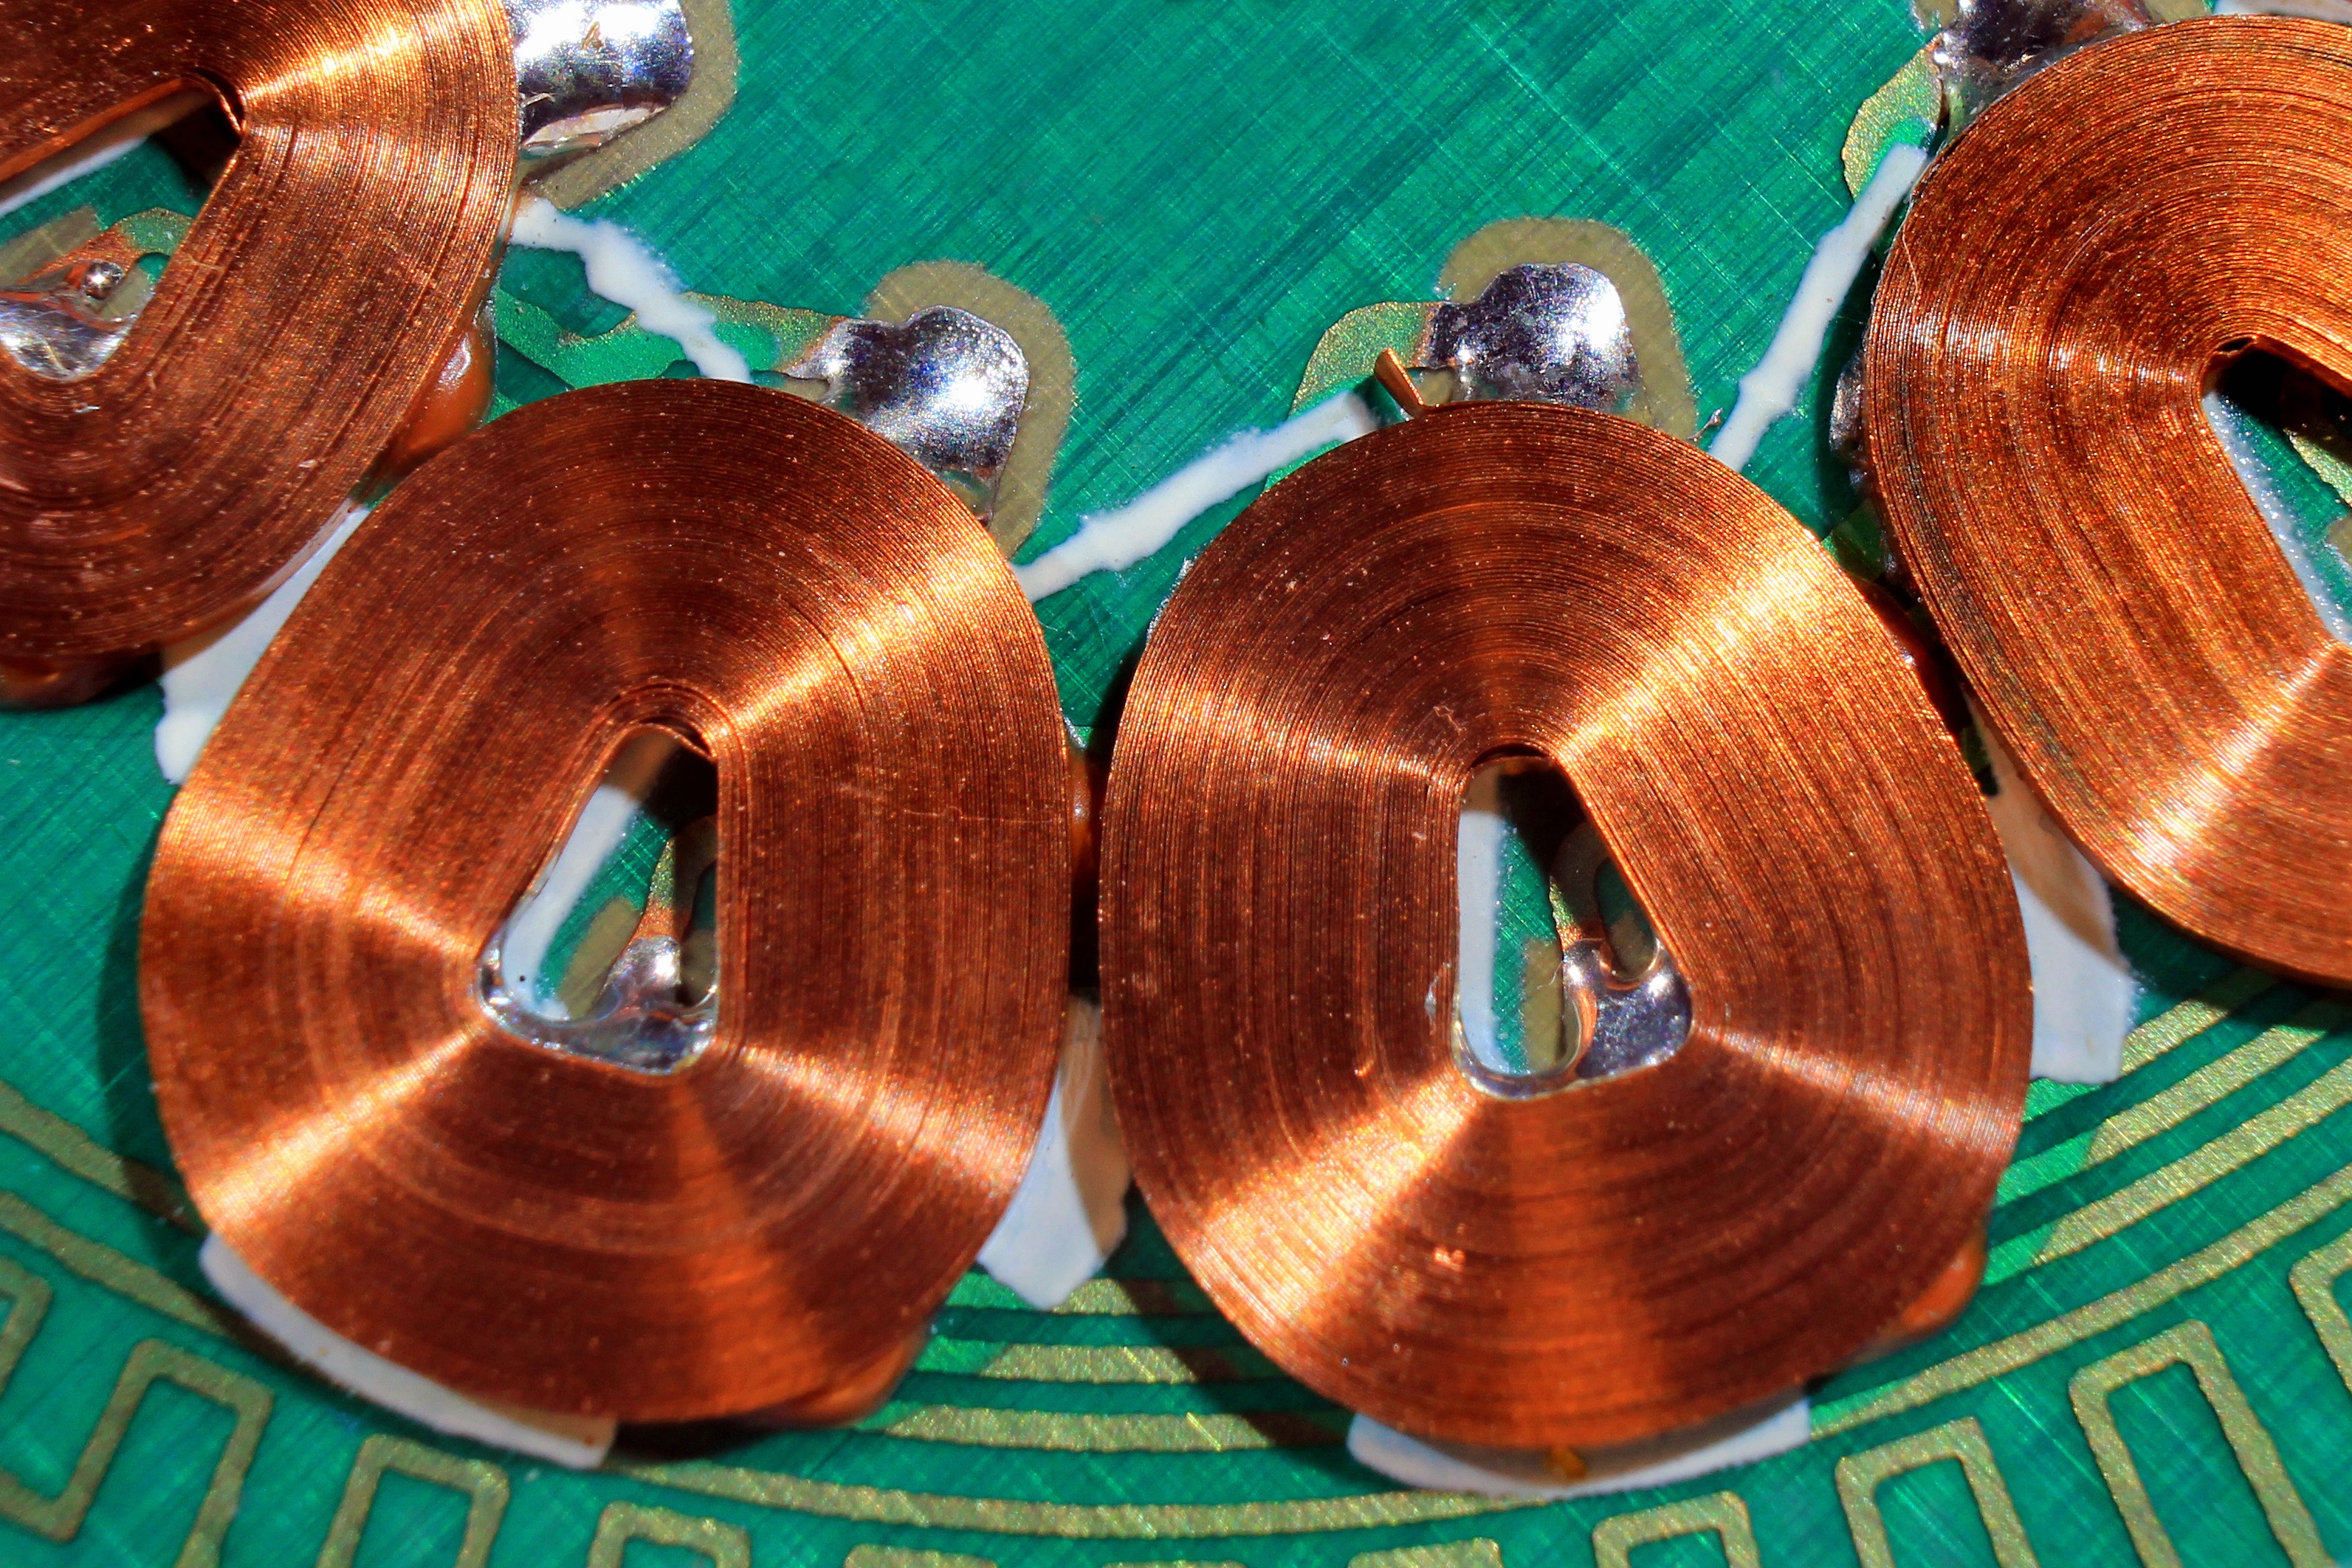 Copper coils for a motor are one example of electromagnetic coil applications enabled by 3D printing.